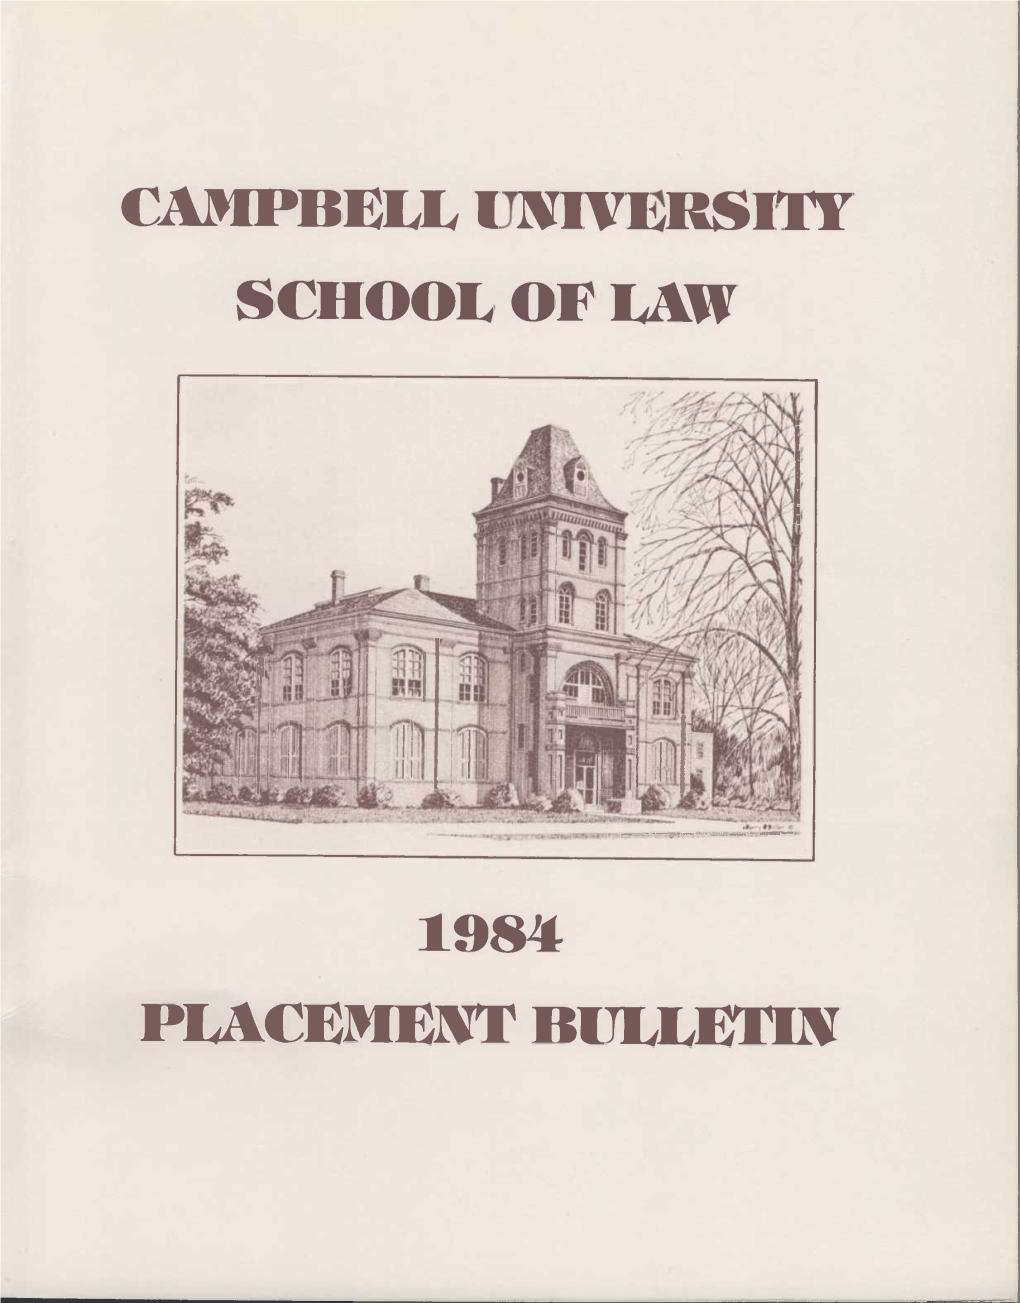 Campbell University School of Law 1984 Placement Bulletin